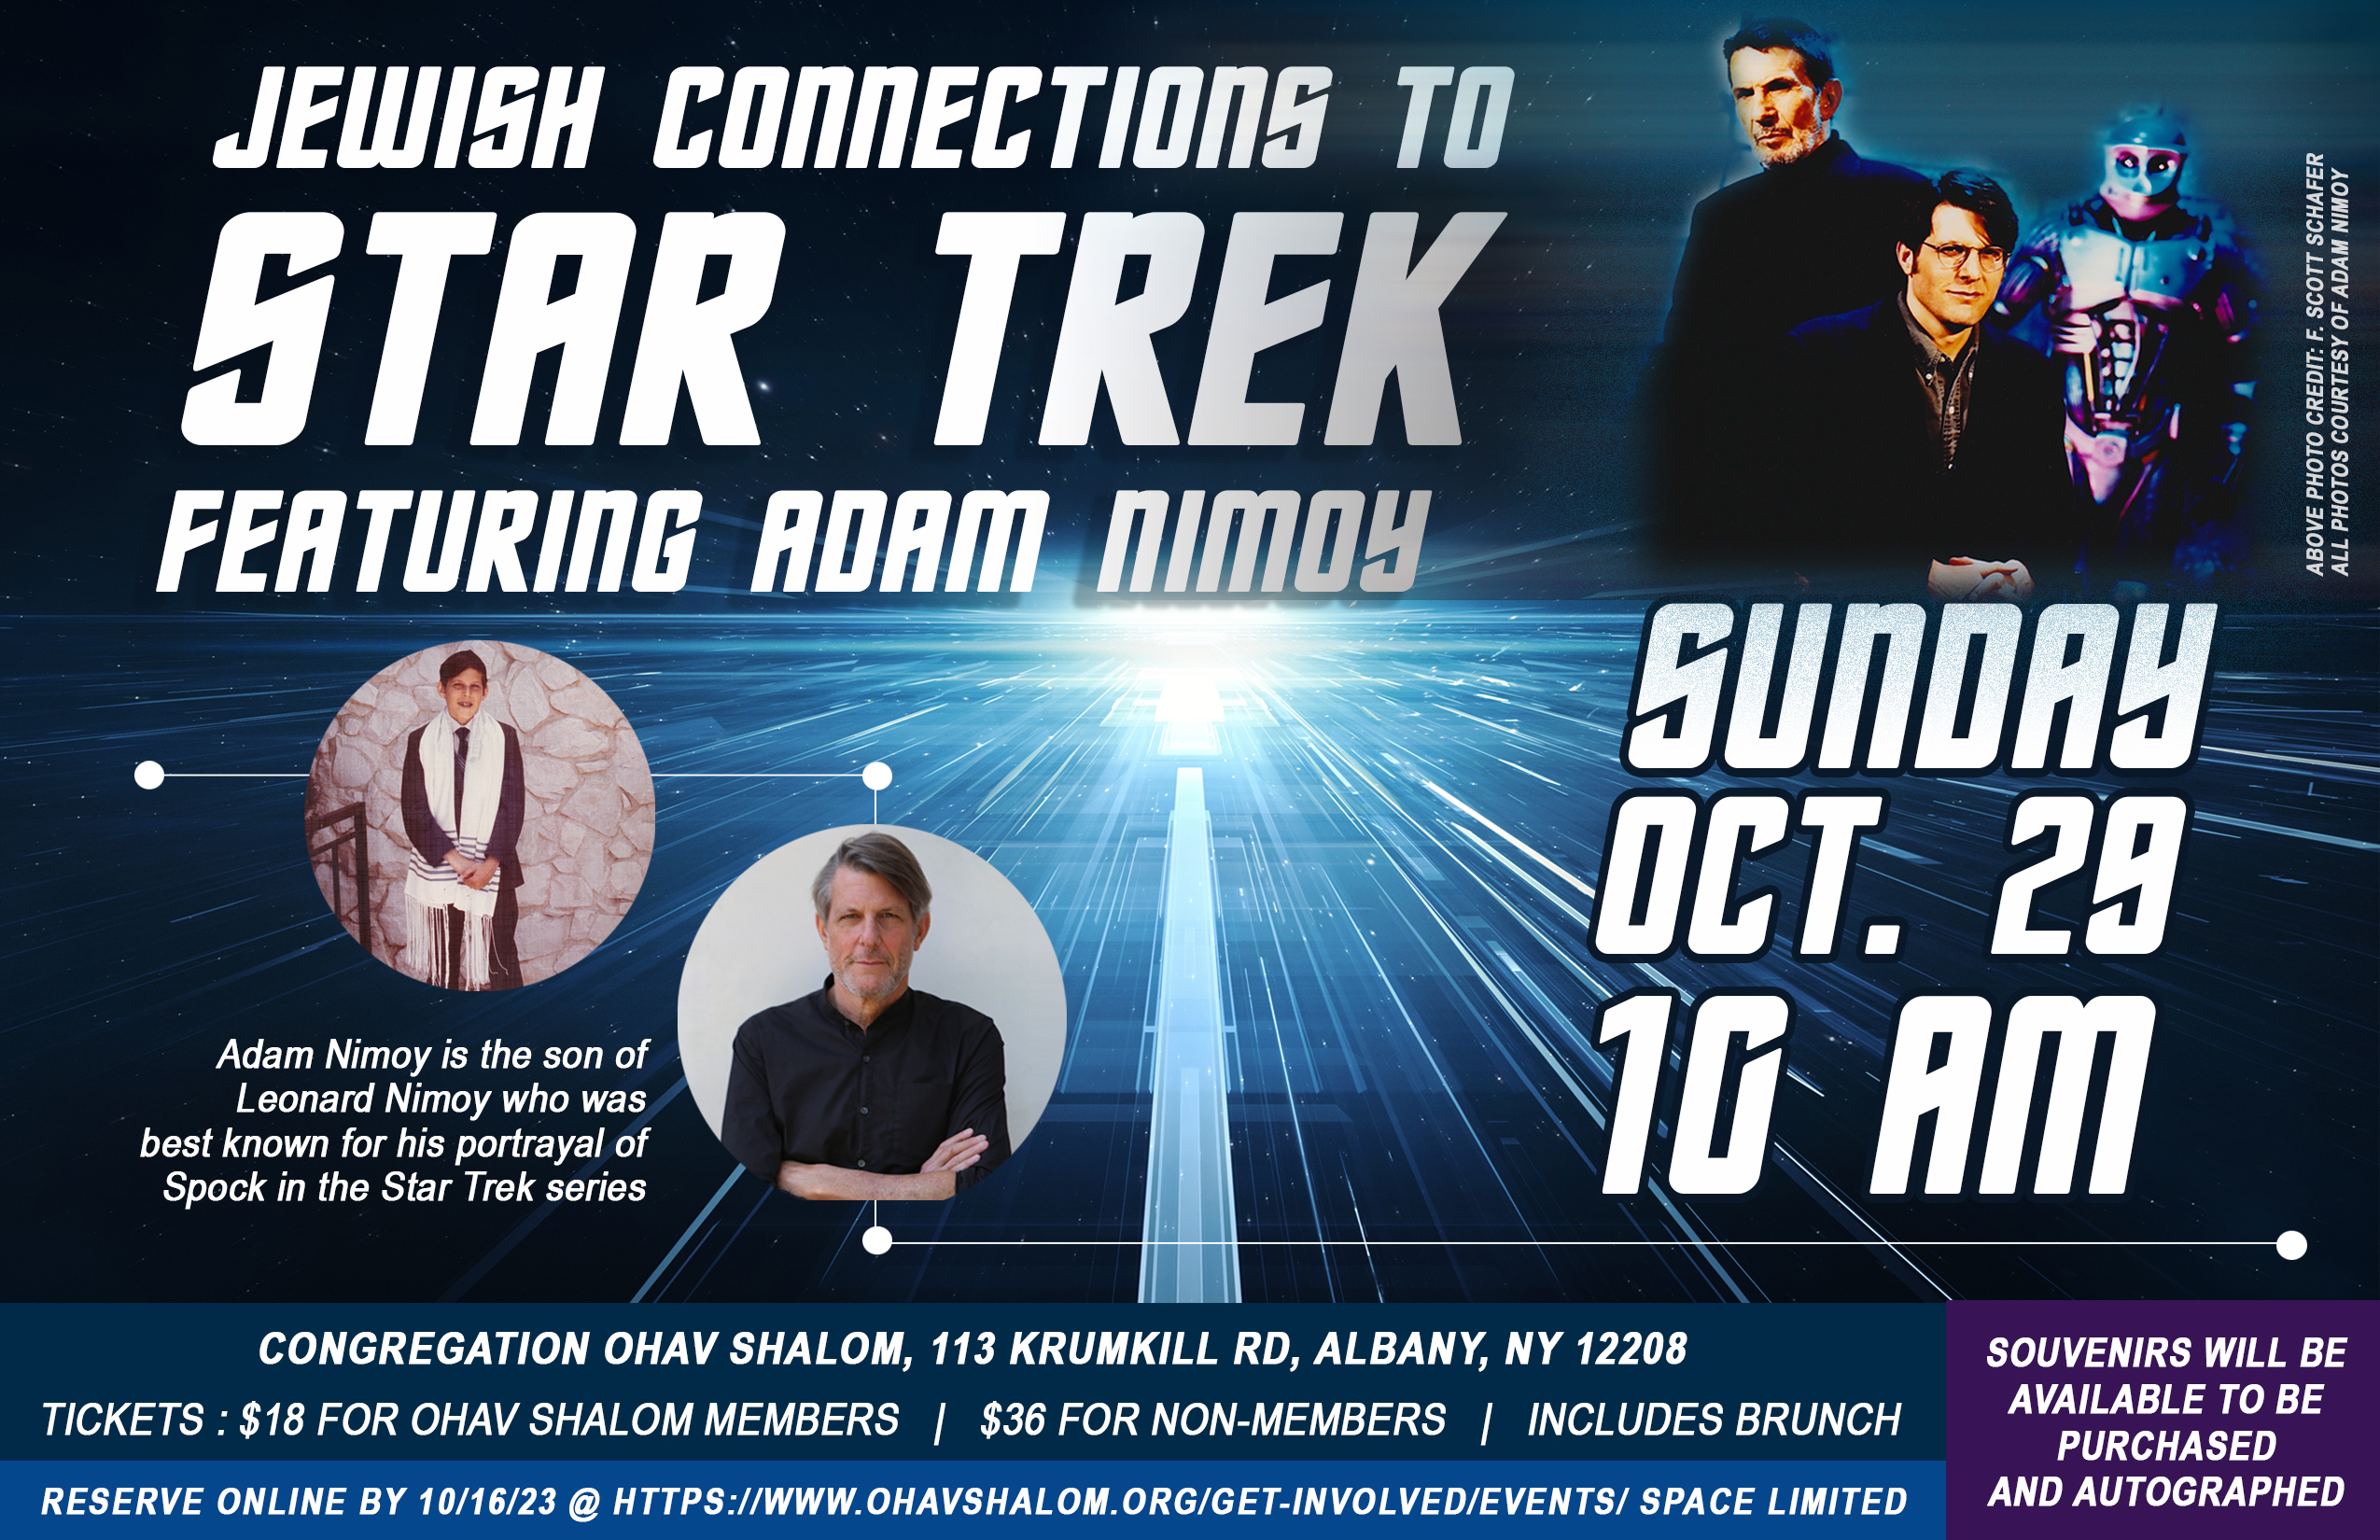 Jewish Connections to Star Trek featuring Adam Nimoy